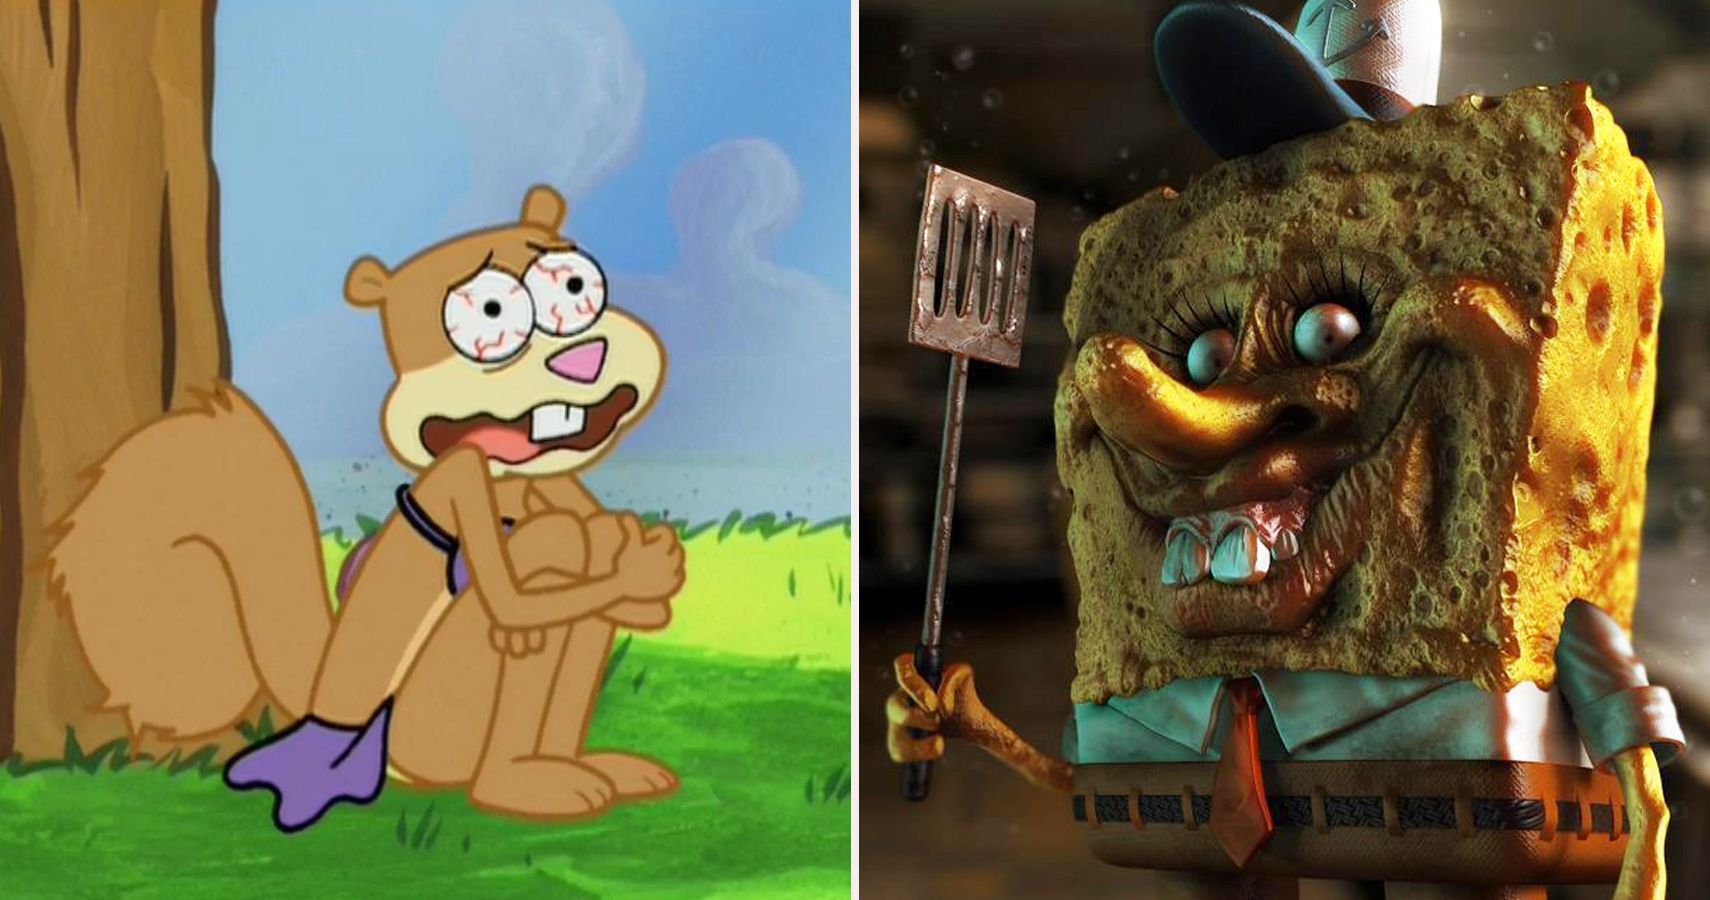 Dark Secrets About SpongeBob SquarePants You Really Don't Want To Know